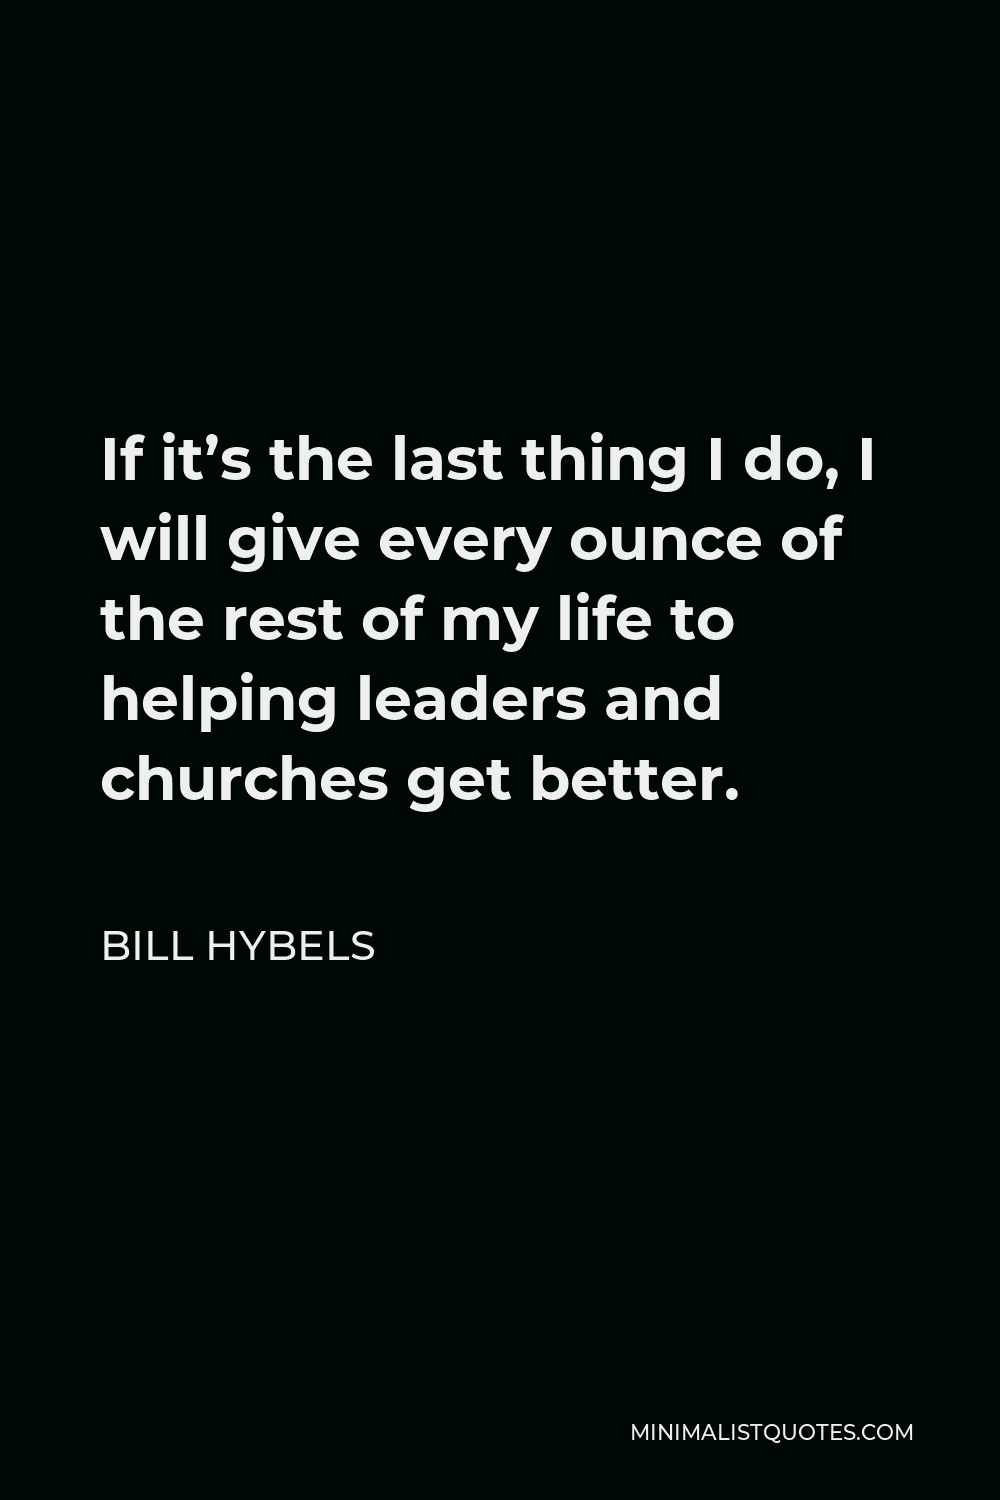 Bill Hybels Quote - If it’s the last thing I do, I will give every ounce of the rest of my life to helping leaders and churches get better.